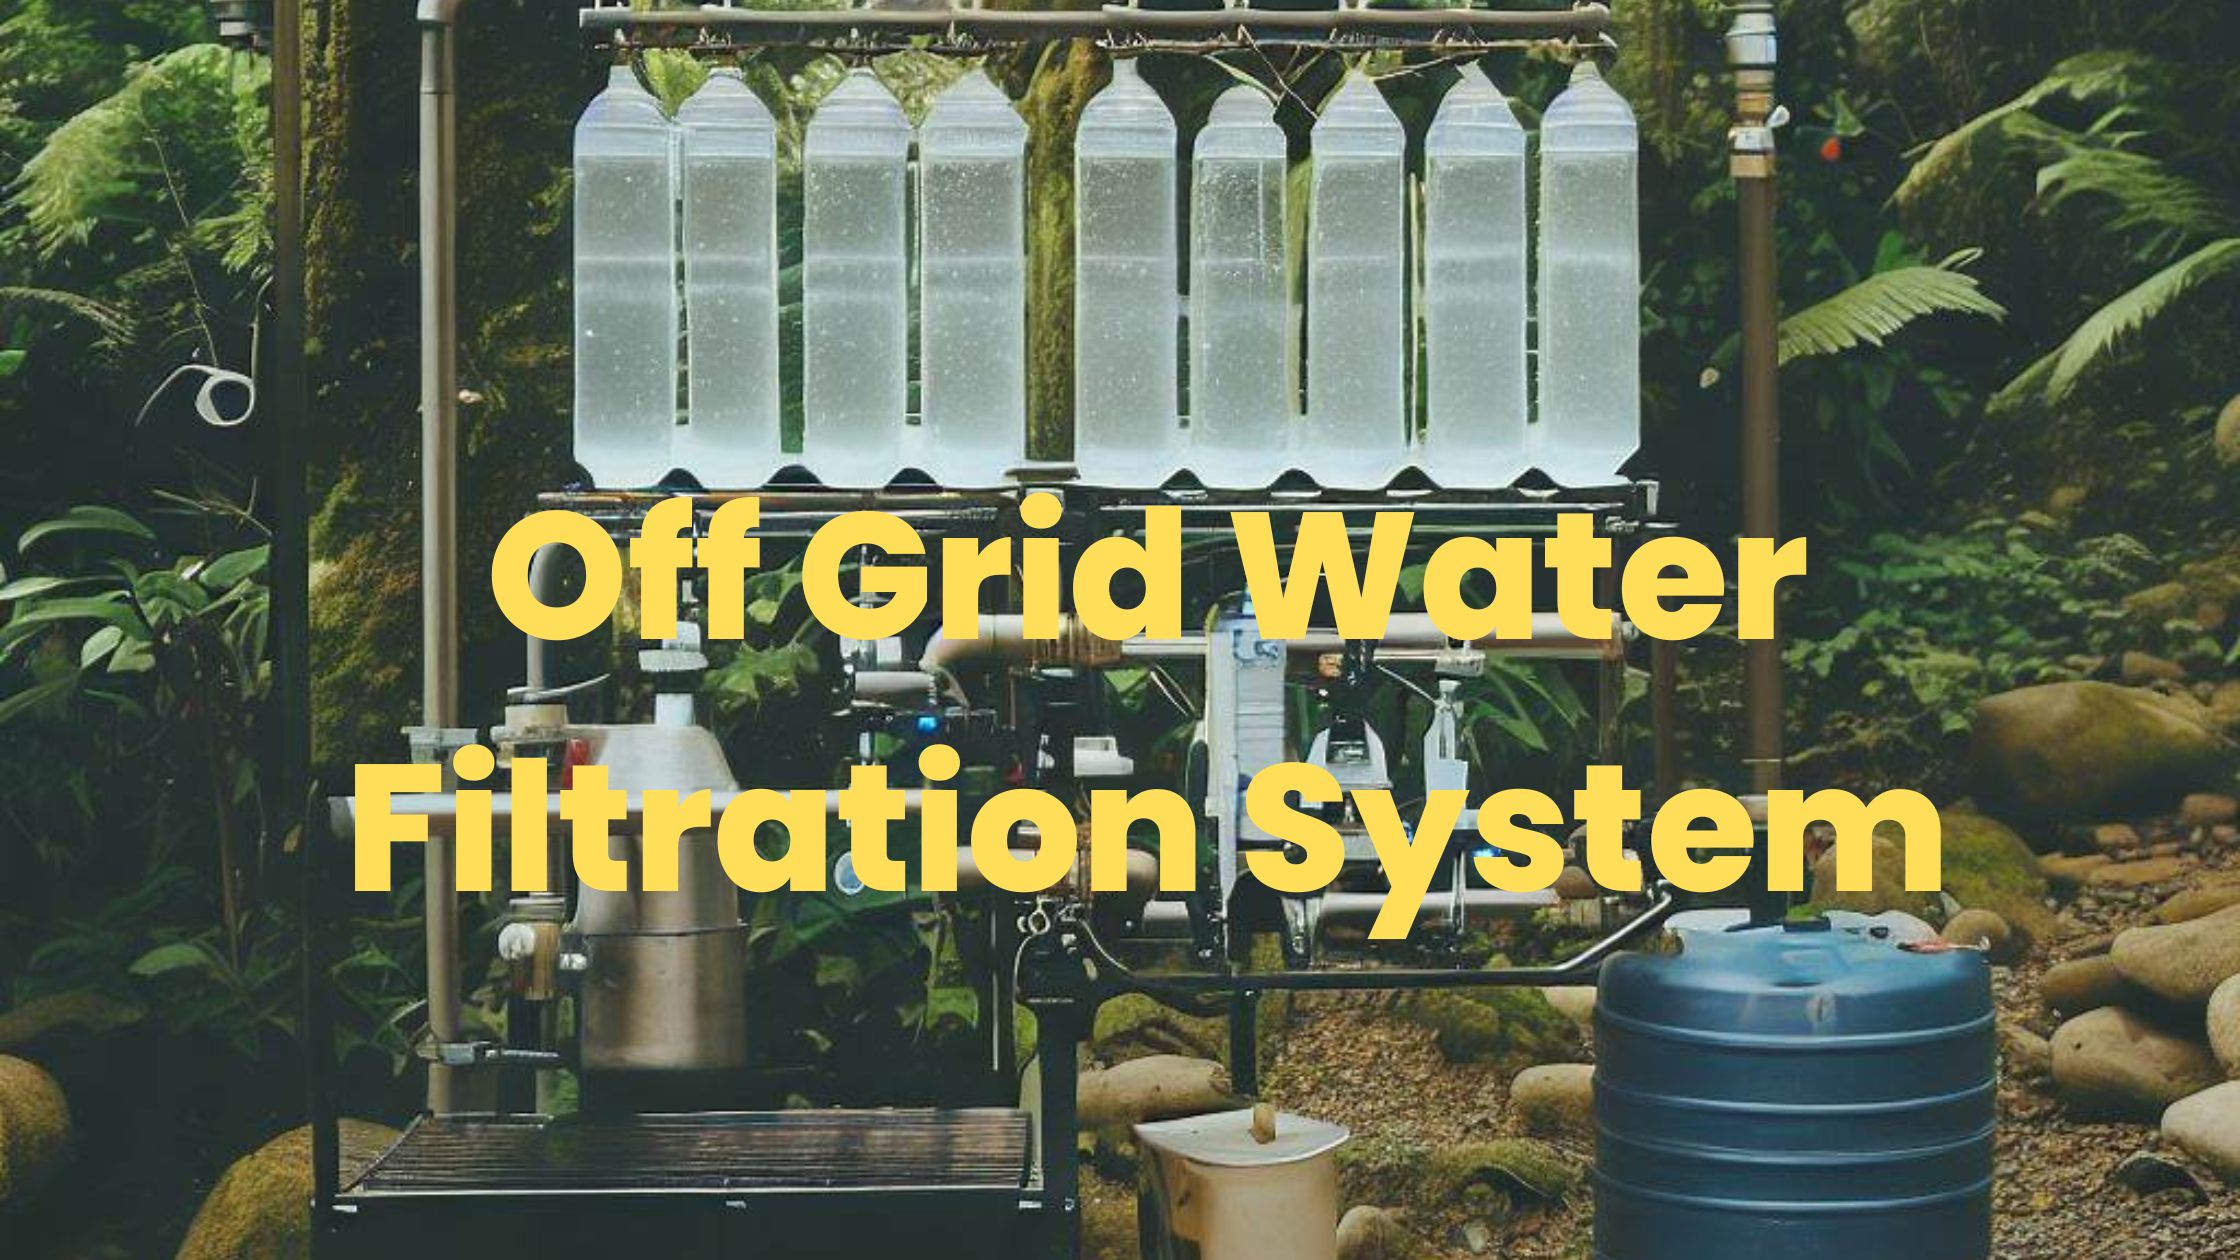 How to work off grid water filtration system ?